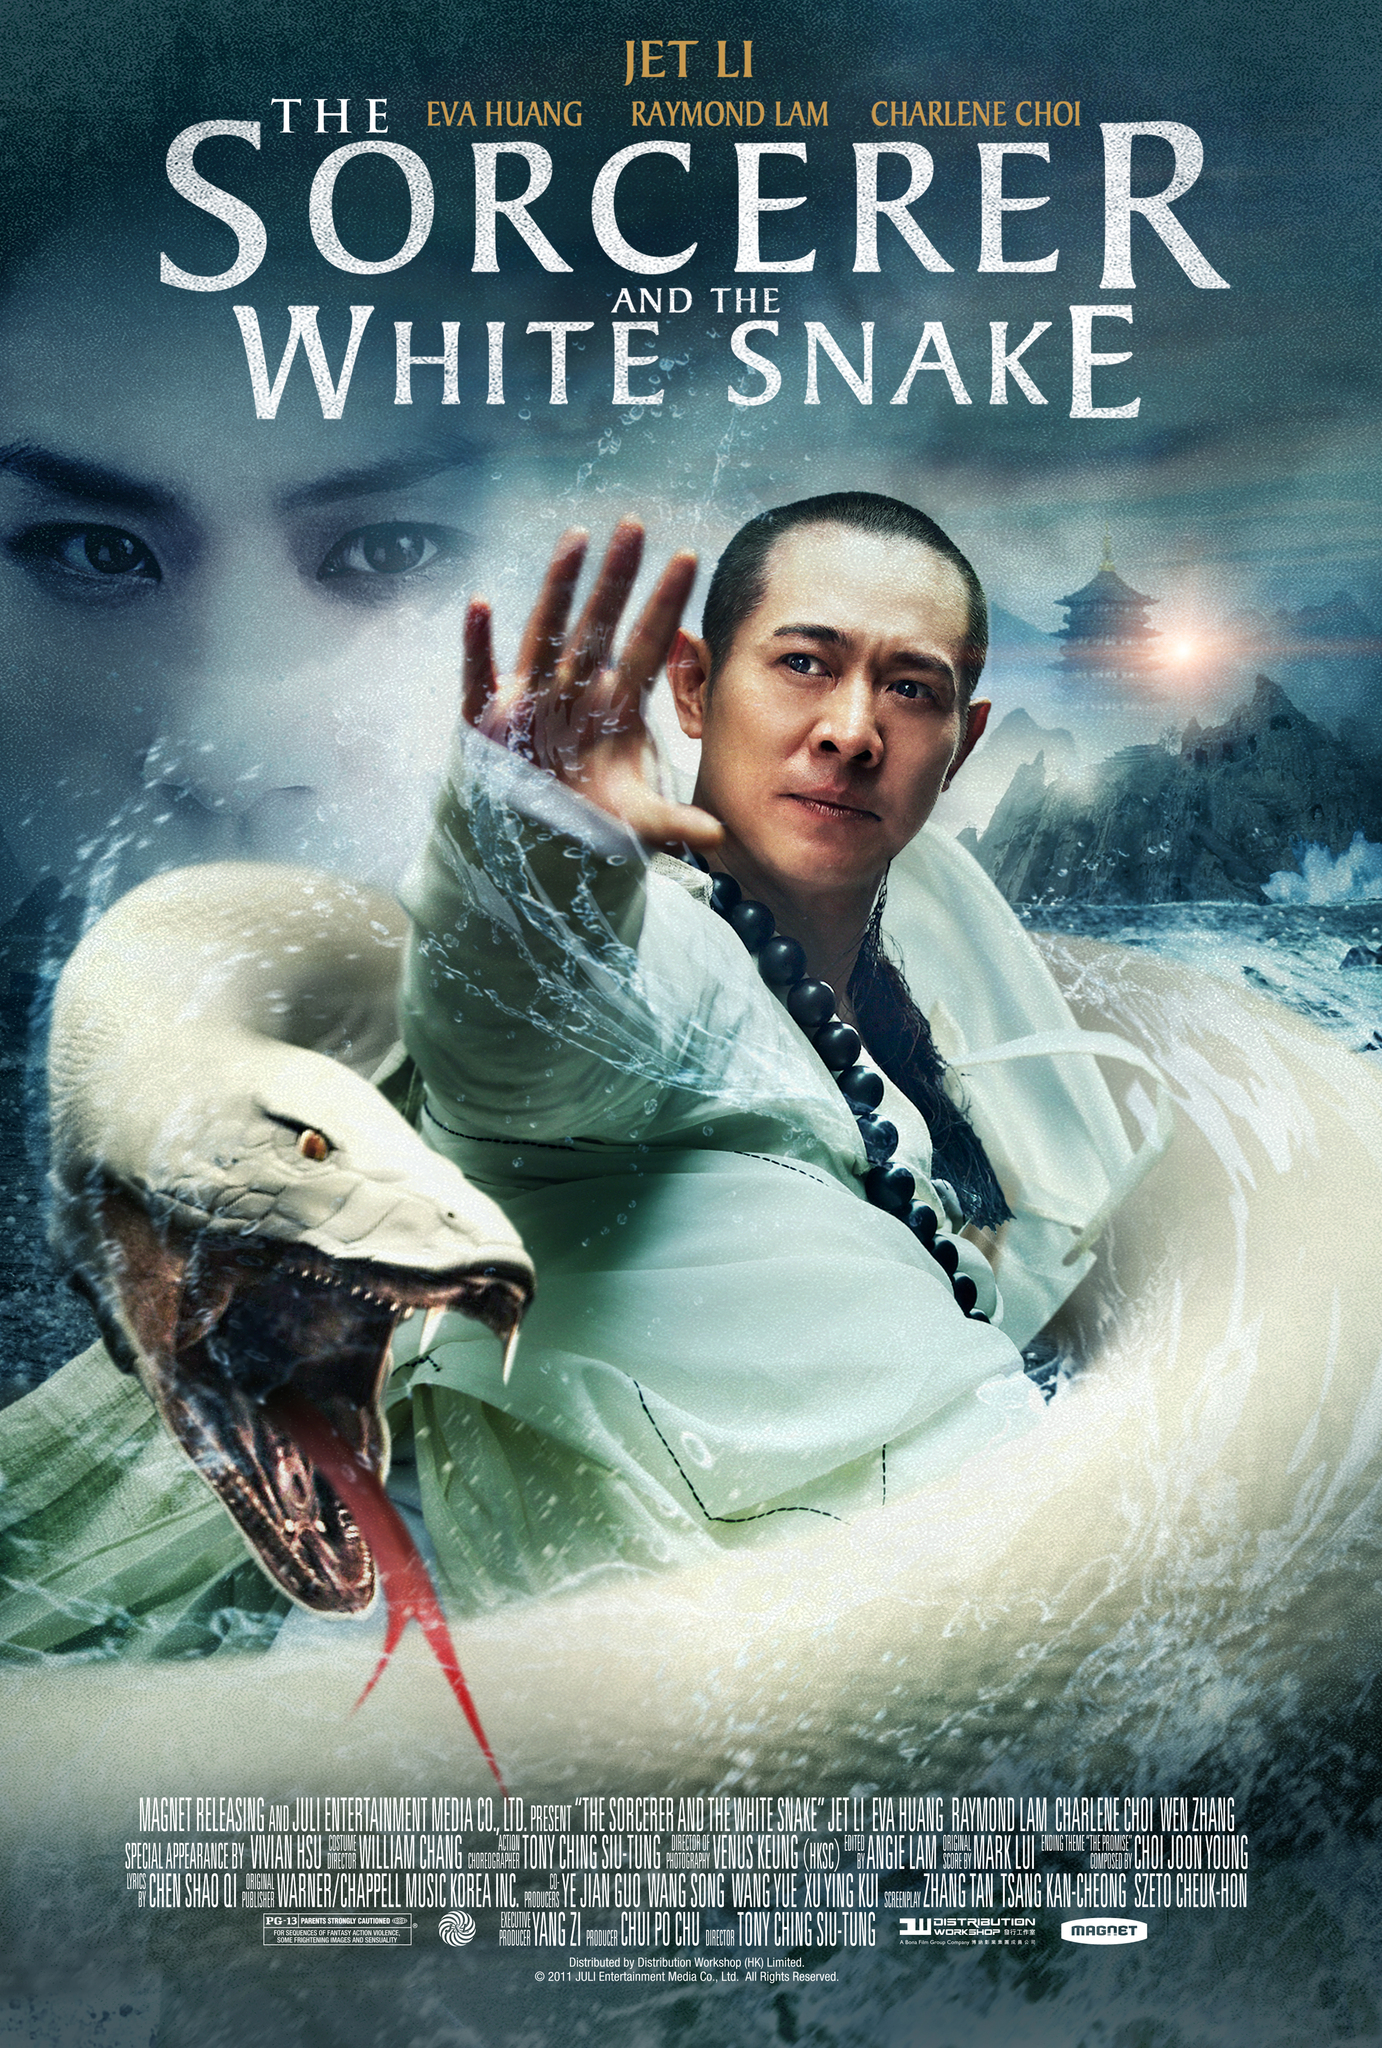 The Sorcerer and the White Snake 2011